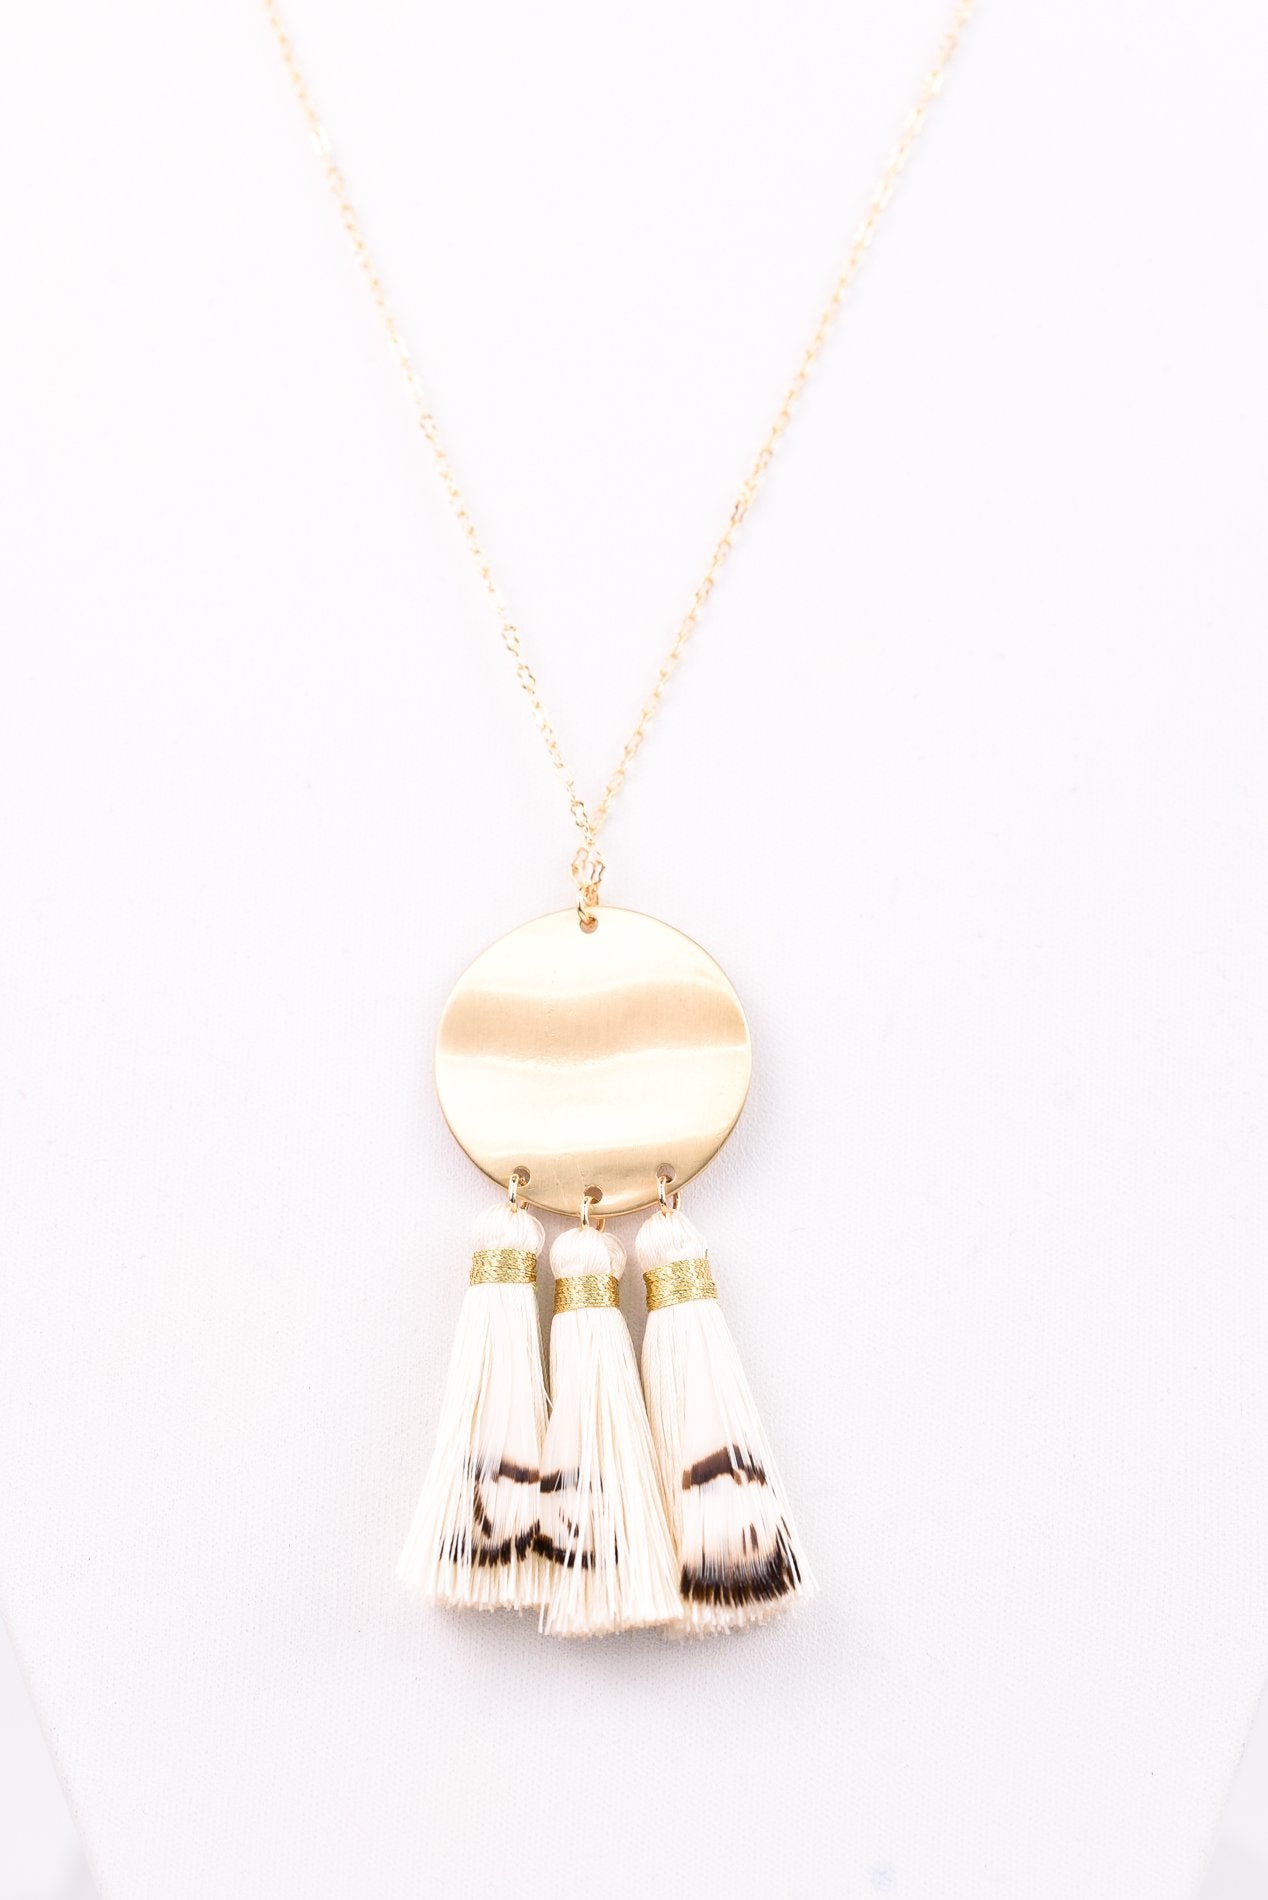 Gold Disc With Fringe/Feather Tassel On Gold Chain Necklace - NEK2807GO